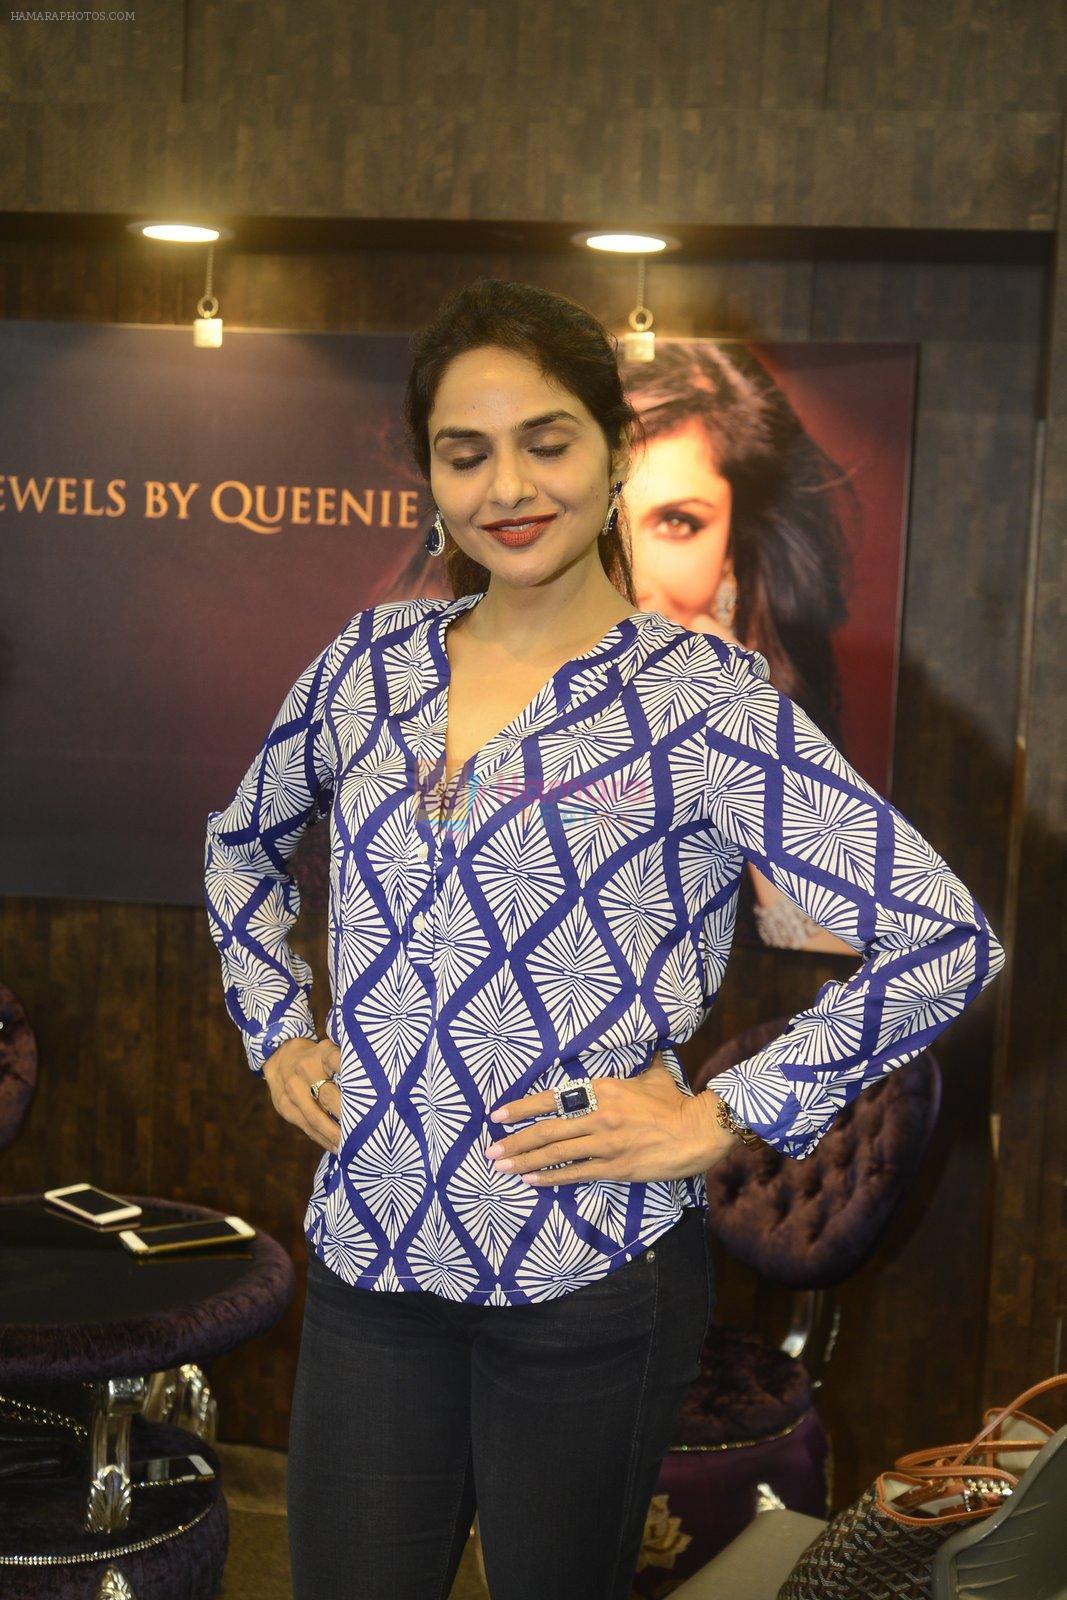 Madhoo Shah on day 2 of JOYA Exhibition on 17th Aug 2016